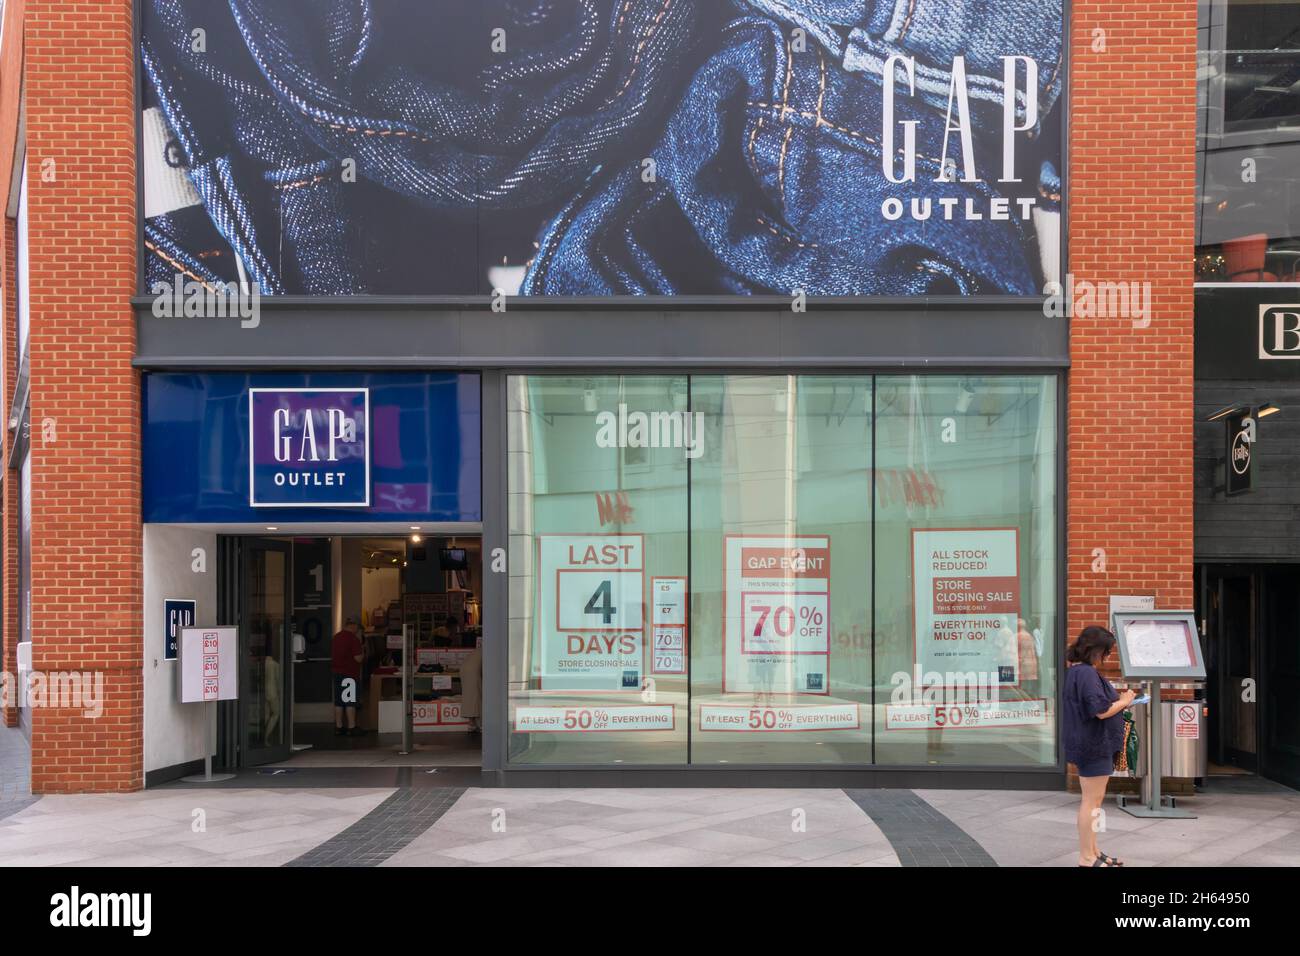 HIgh Wycombe, England - July 21st 2021: A woman checks her phone outside a GAP store. All Gap stores have closed.. Stock Photo